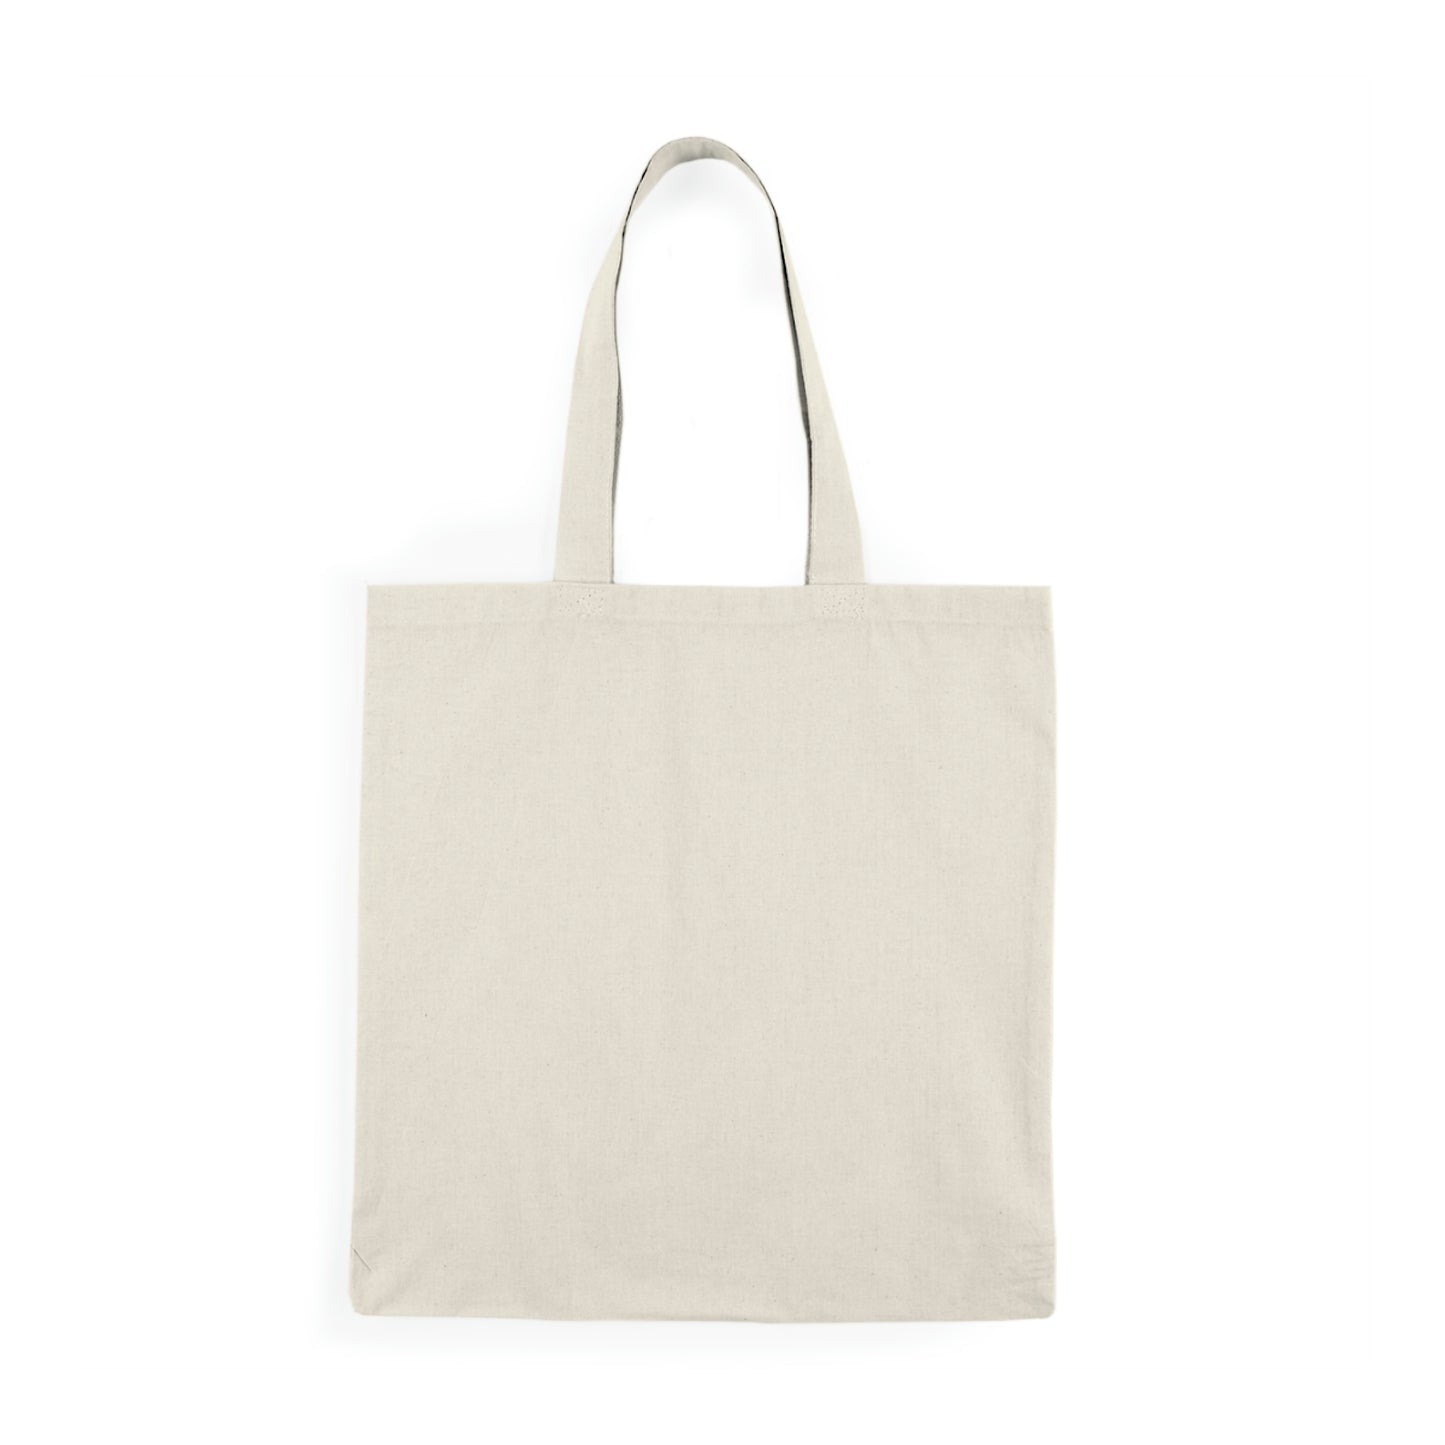 She Is Vengeance - Natural Tote Bag